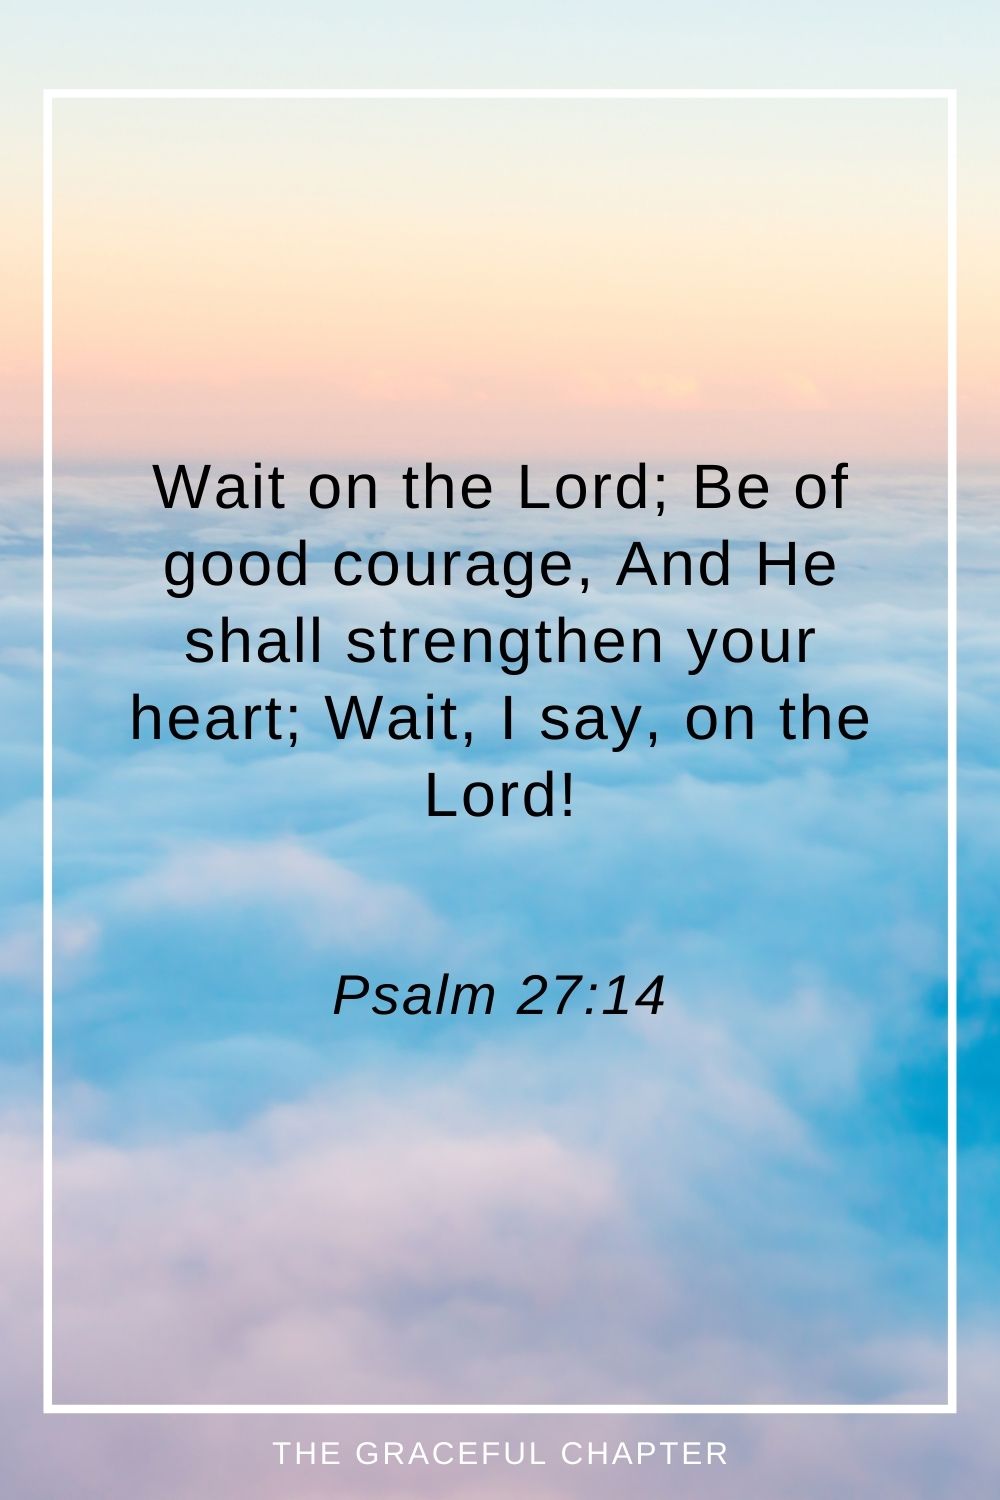 Wait on the Lord; Be of good courage, And He shall strengthen your heart; Wait, I say, on the Lord! Psalm 27:14